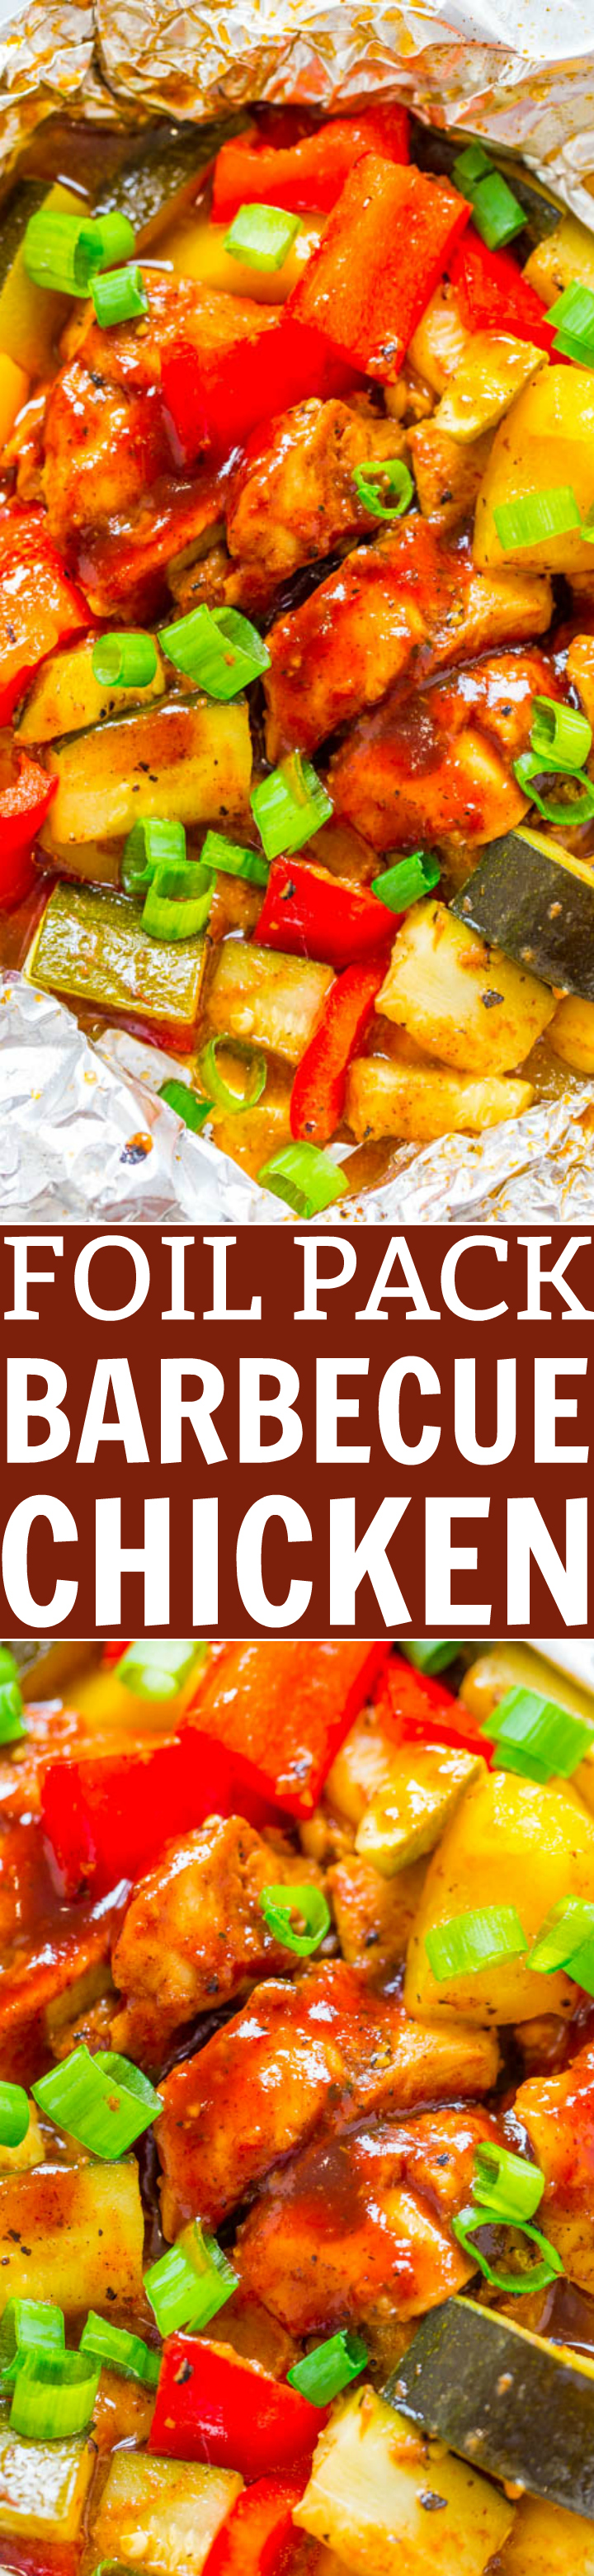 BBQ Chicken Foil Packets — Ready in 15 minutes and such an EASY way to enjoy barbecue chicken on the grill!! A DELISH and HEALTHY meal made in a foil pack with ZERO cleanup!!